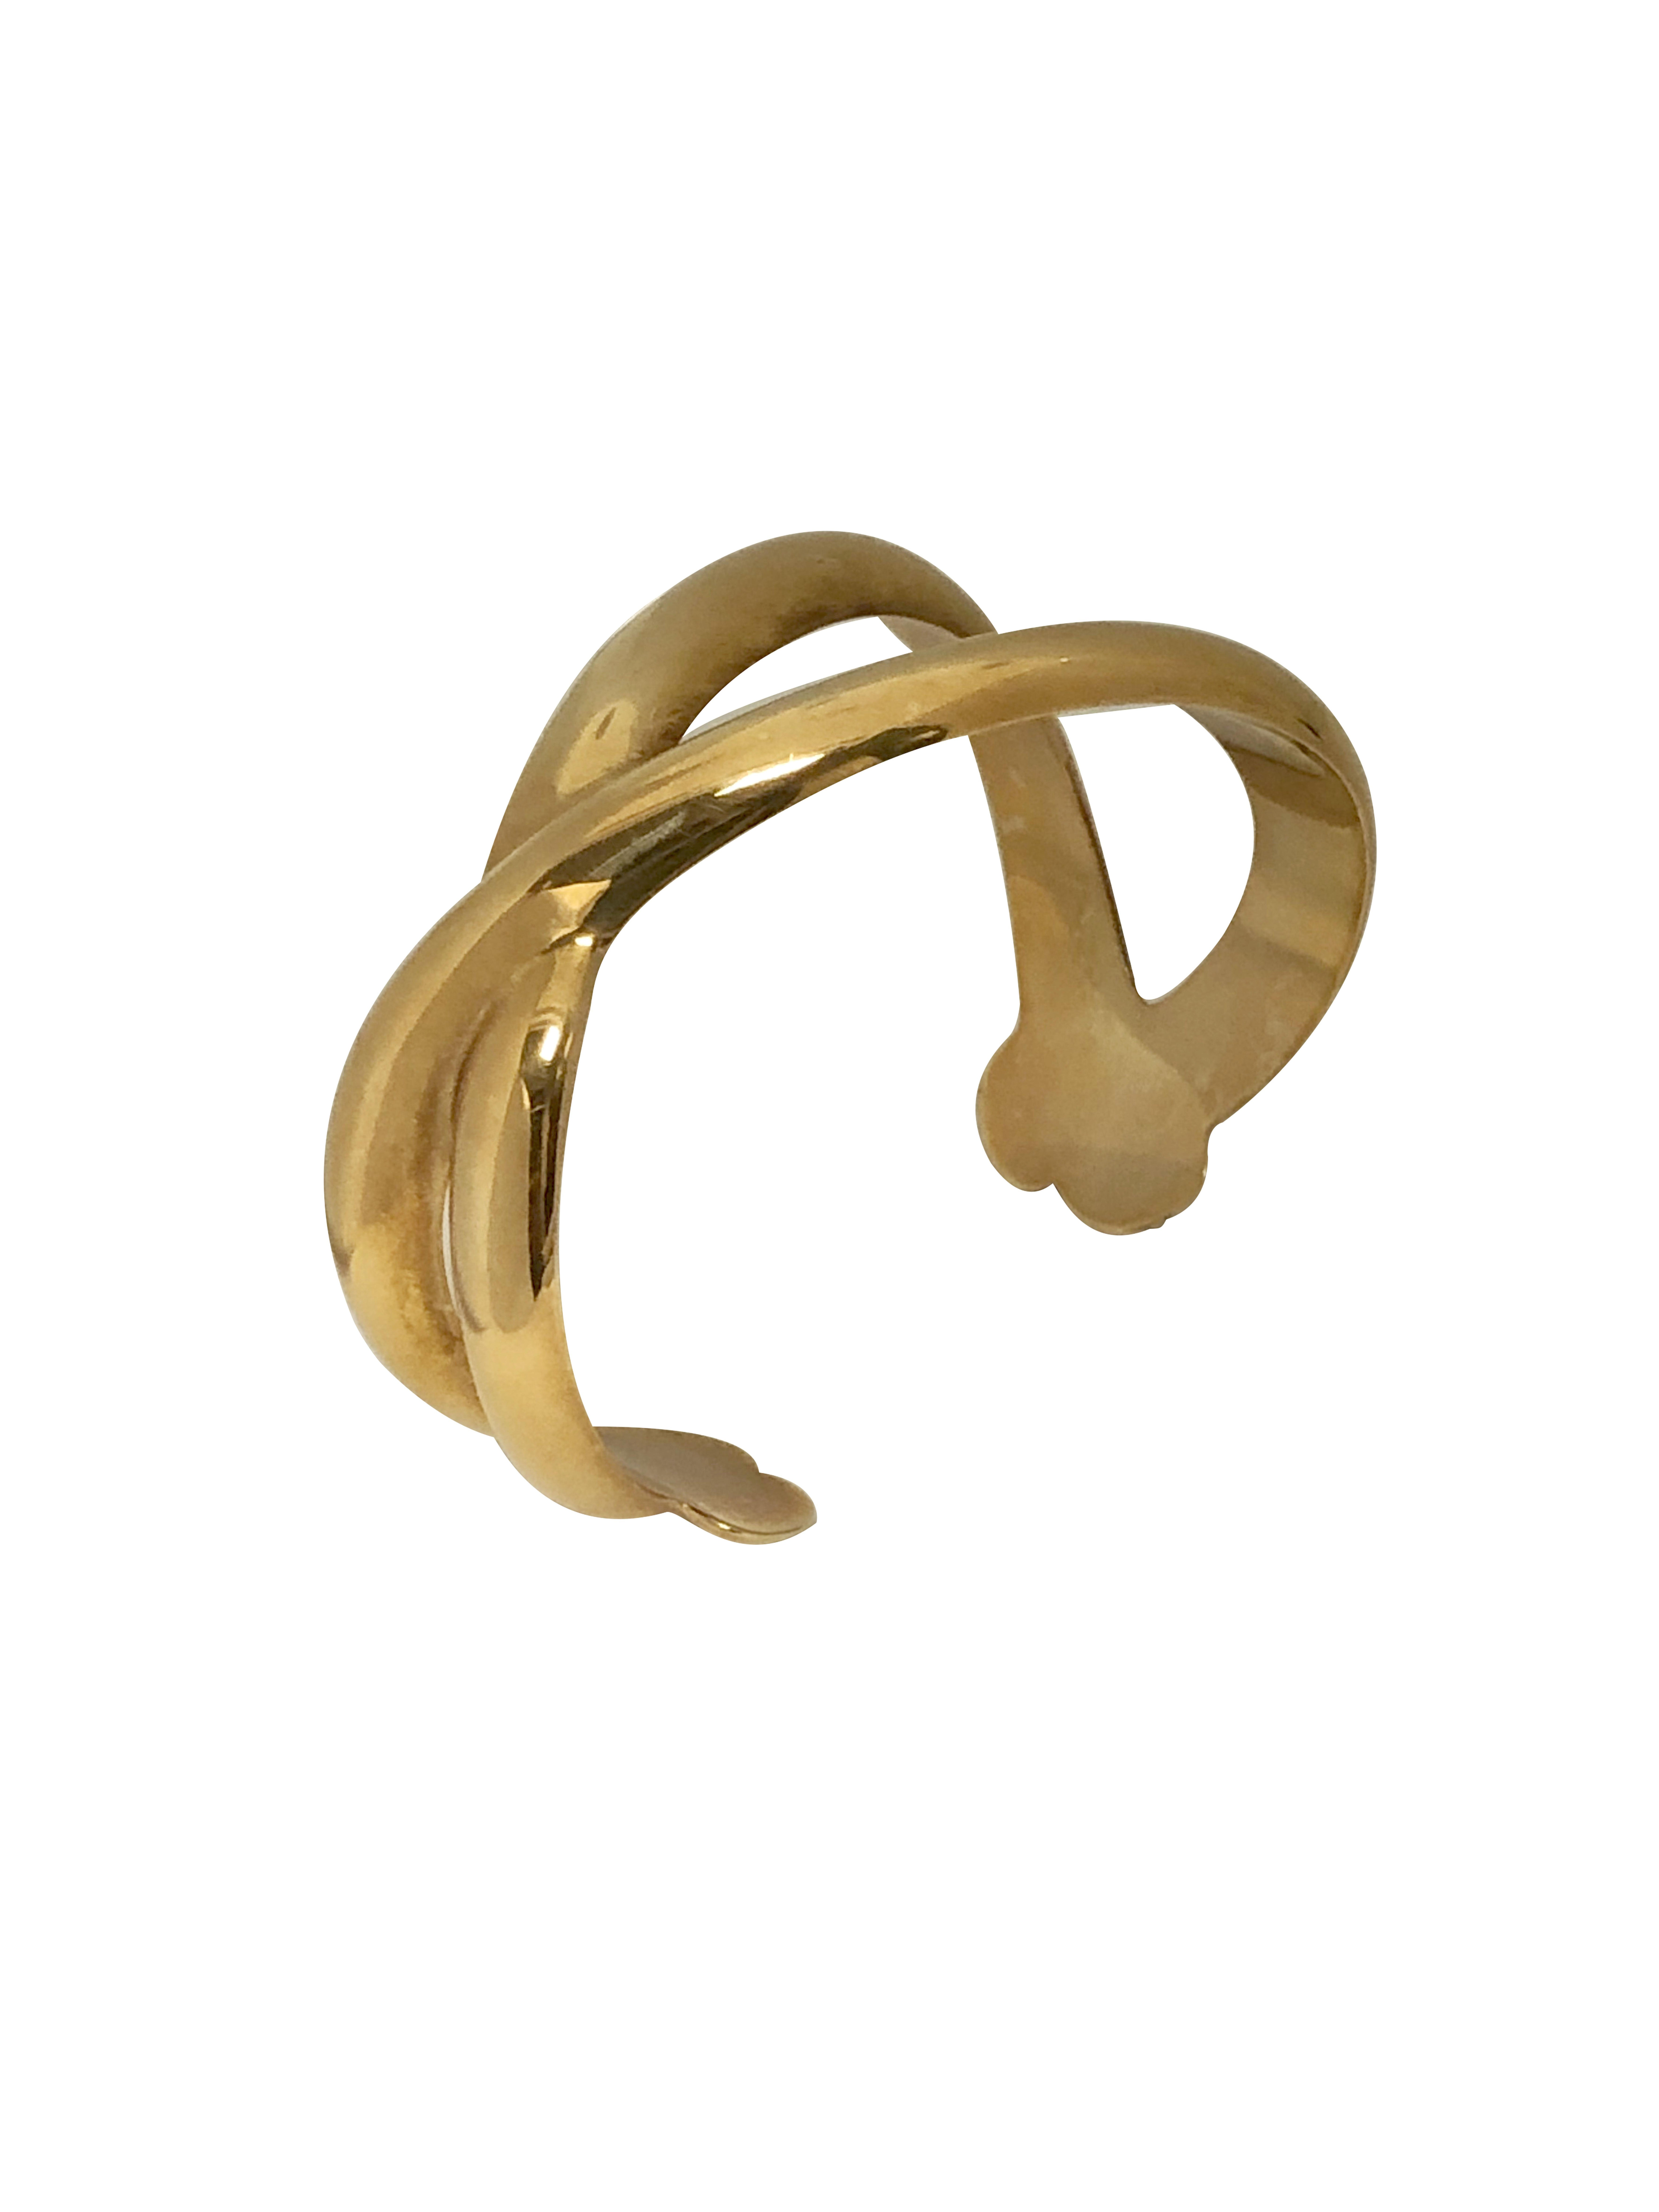 Circa 1980s Angela Cummings Scarce 18K Yellow Gold Cuff Bracelet in a crossed X design, This is Before Her association with Tiffany & Company and many pieces like this were not massed Produced. Measuring 2 1/2 inches across the top and 1 1/2 inches